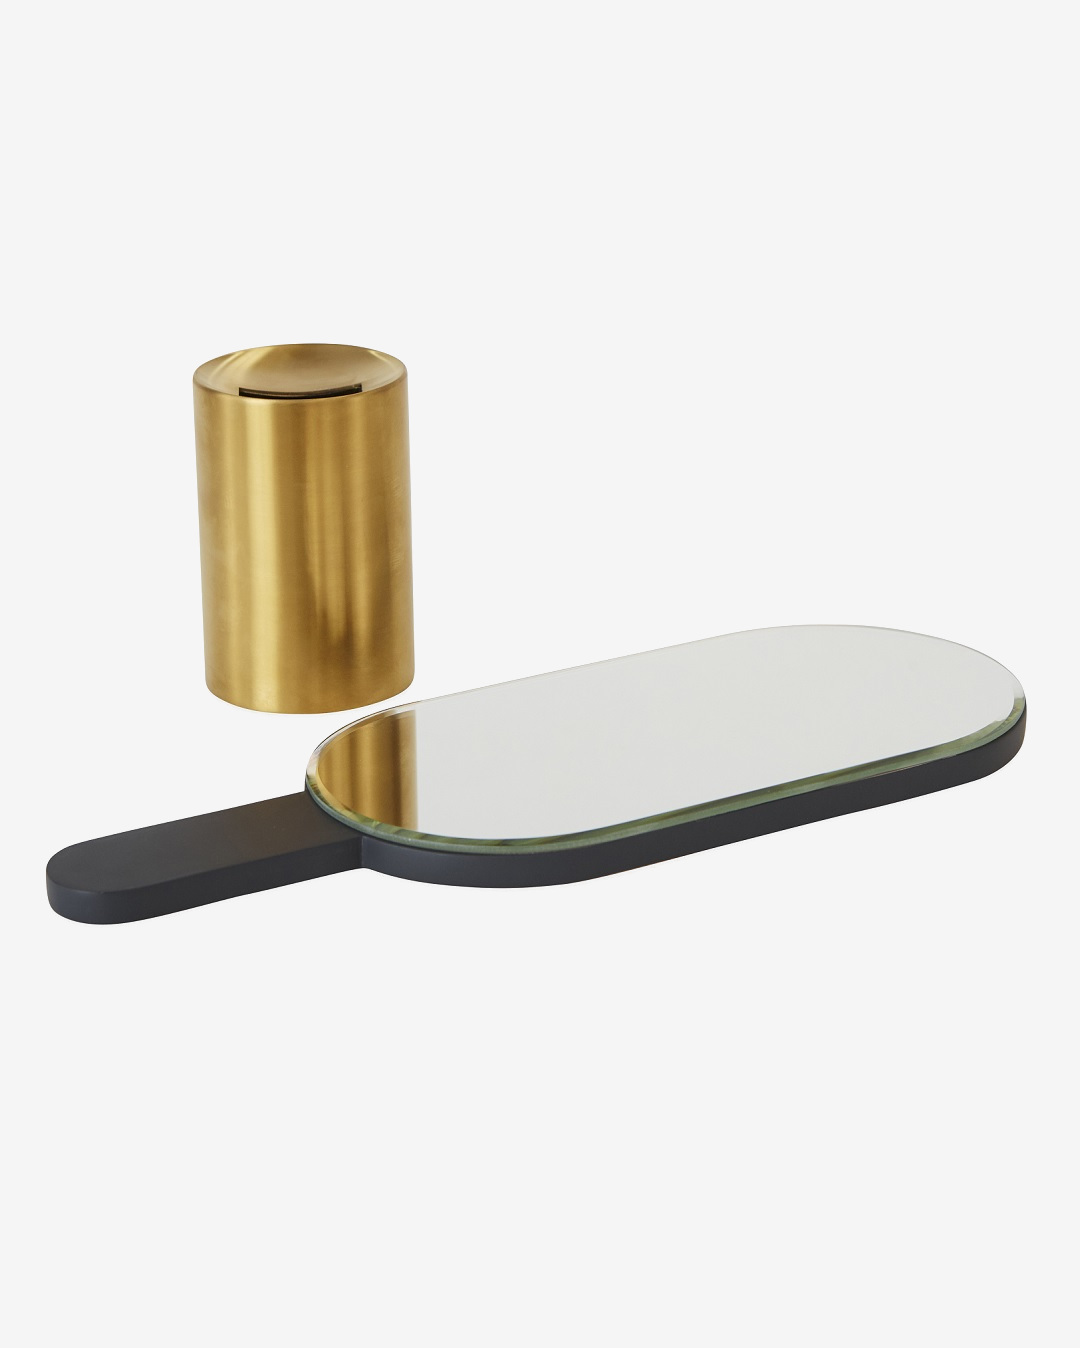 Hnad mirror and gold stand